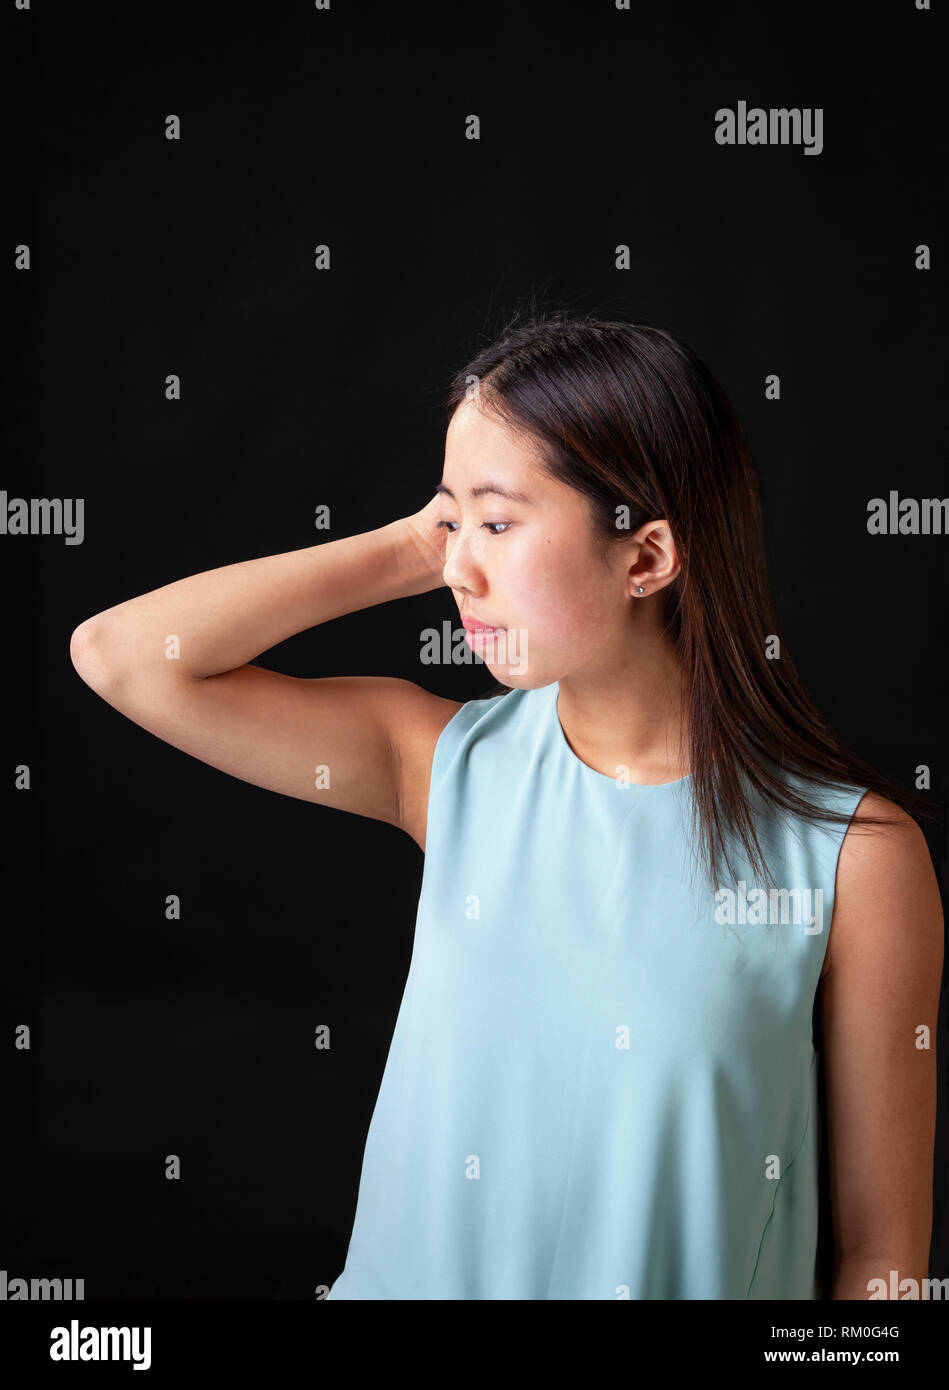 Beautiful young Asian female teen model posing in studio on black background. Stock Photo